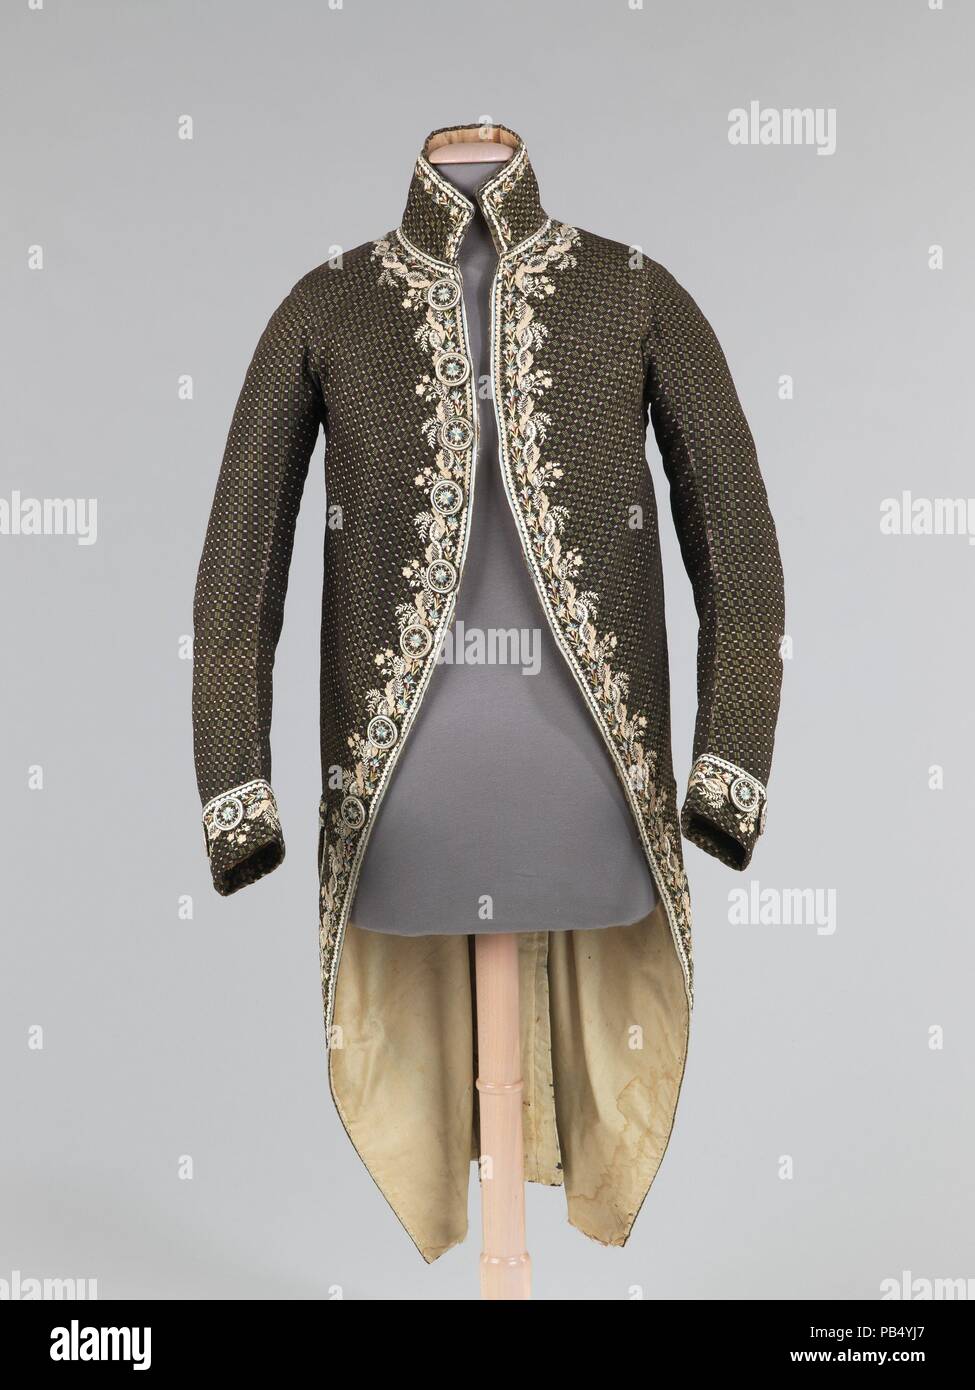 Costume of a nobleman at the court of King Louis XVI of France, late 18th  century. In wig, velvet coat, waistcoat and breeches, gold embroidery,  court sword, buckle shoes, bicorne hat. Seigneur